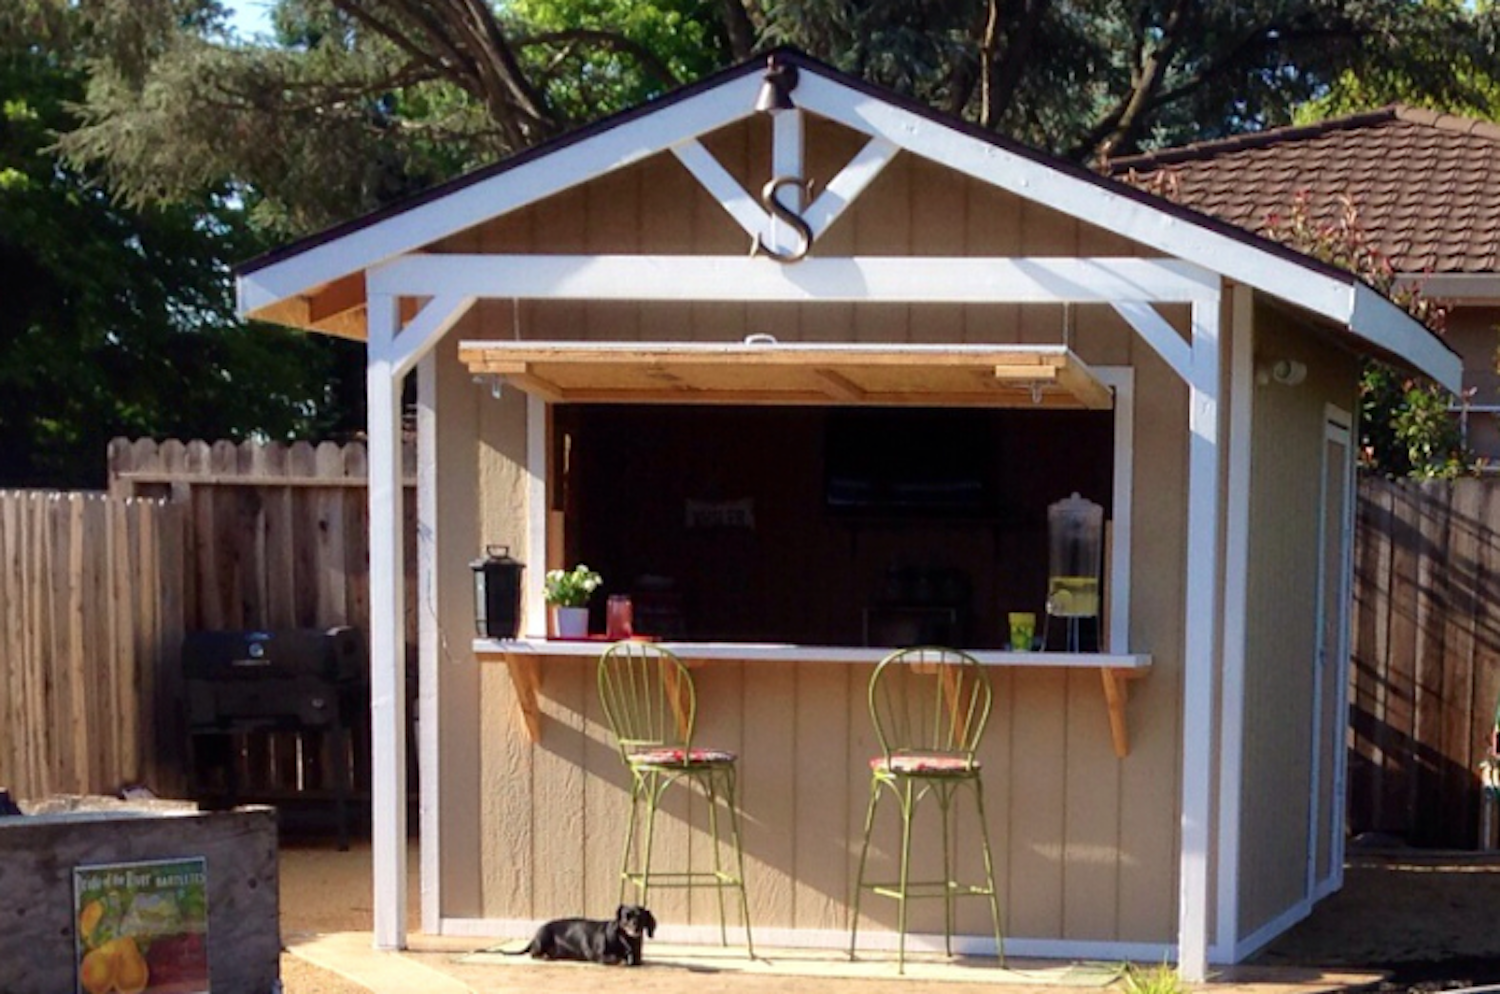 How To Make A Bar Shed From A Backyard Garden Shed ...